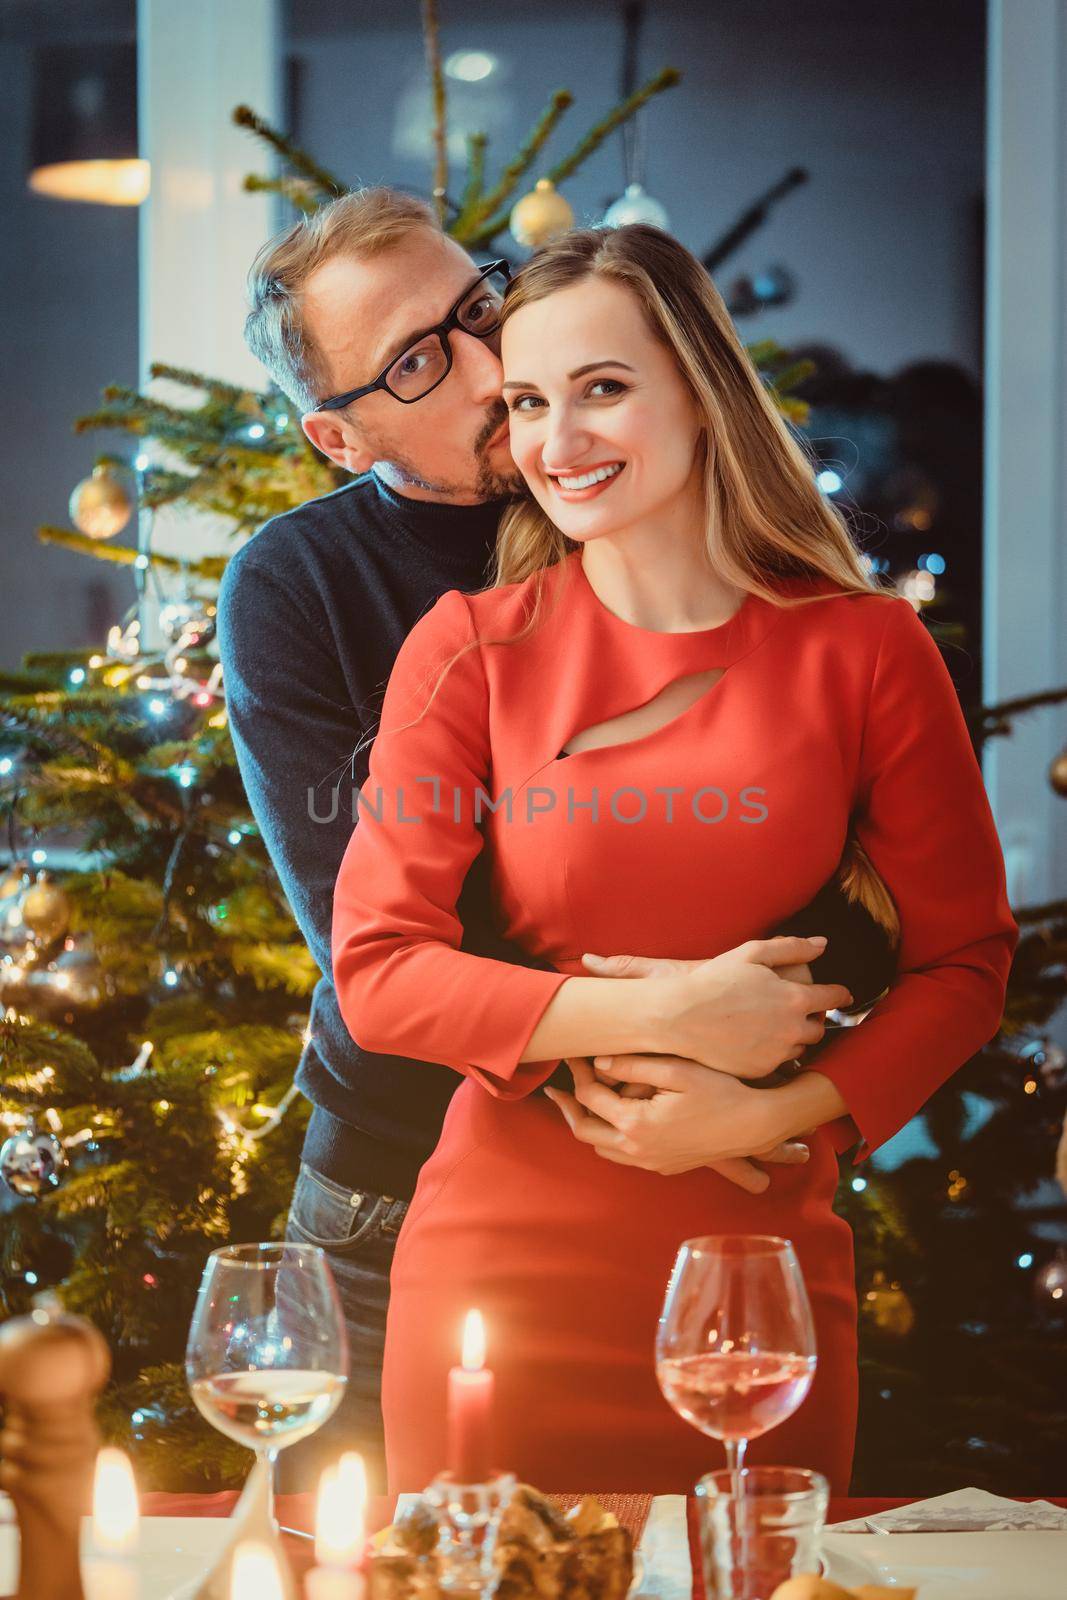 Middle aged couple in romantic pose in front of Christmas tree in seasonal spirit